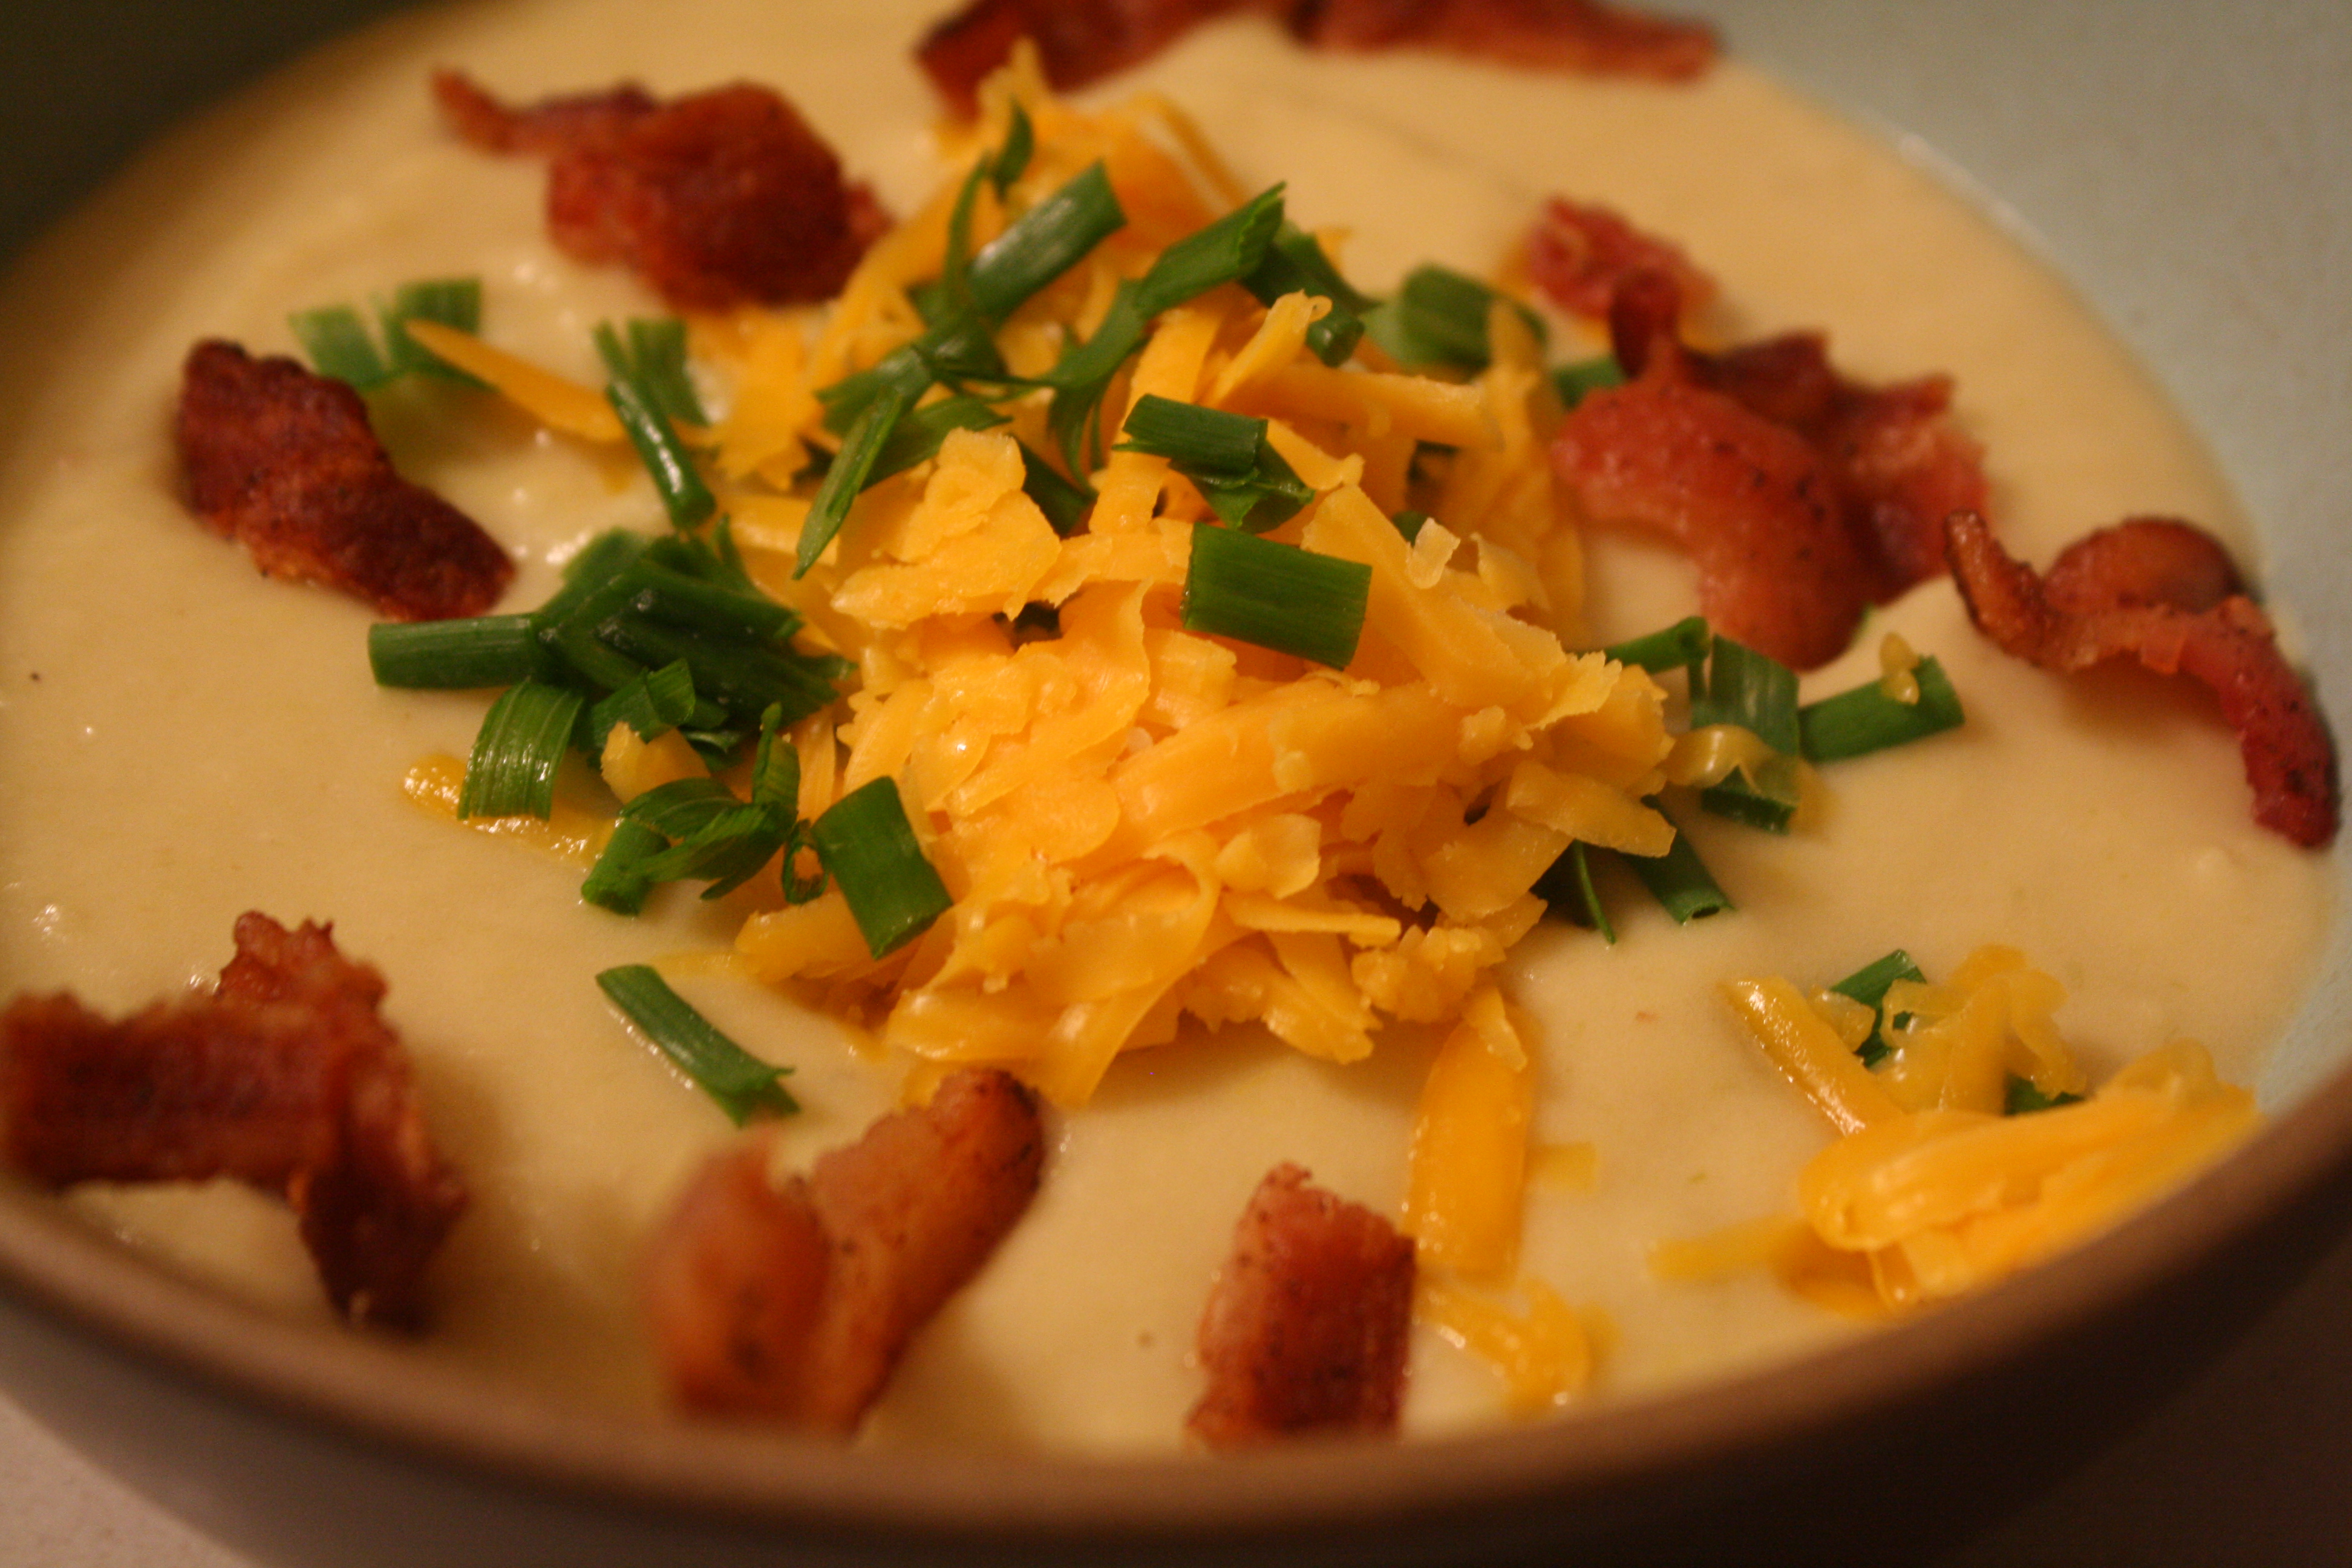 Potato leek soup with bacon and cheese topping